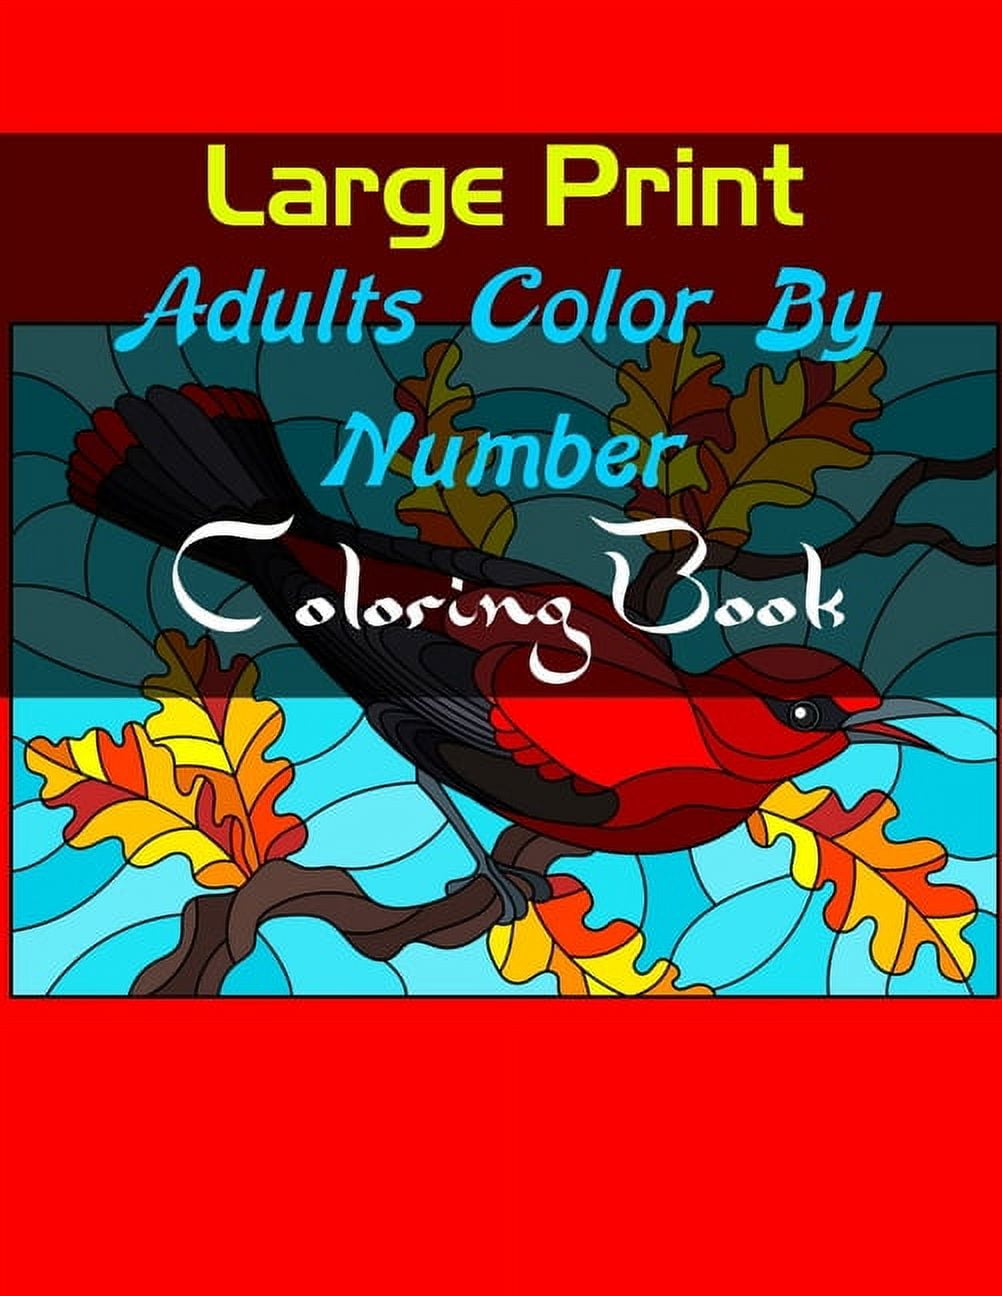 large-print-adults-color-by-number-coloring-book-large-print-adults